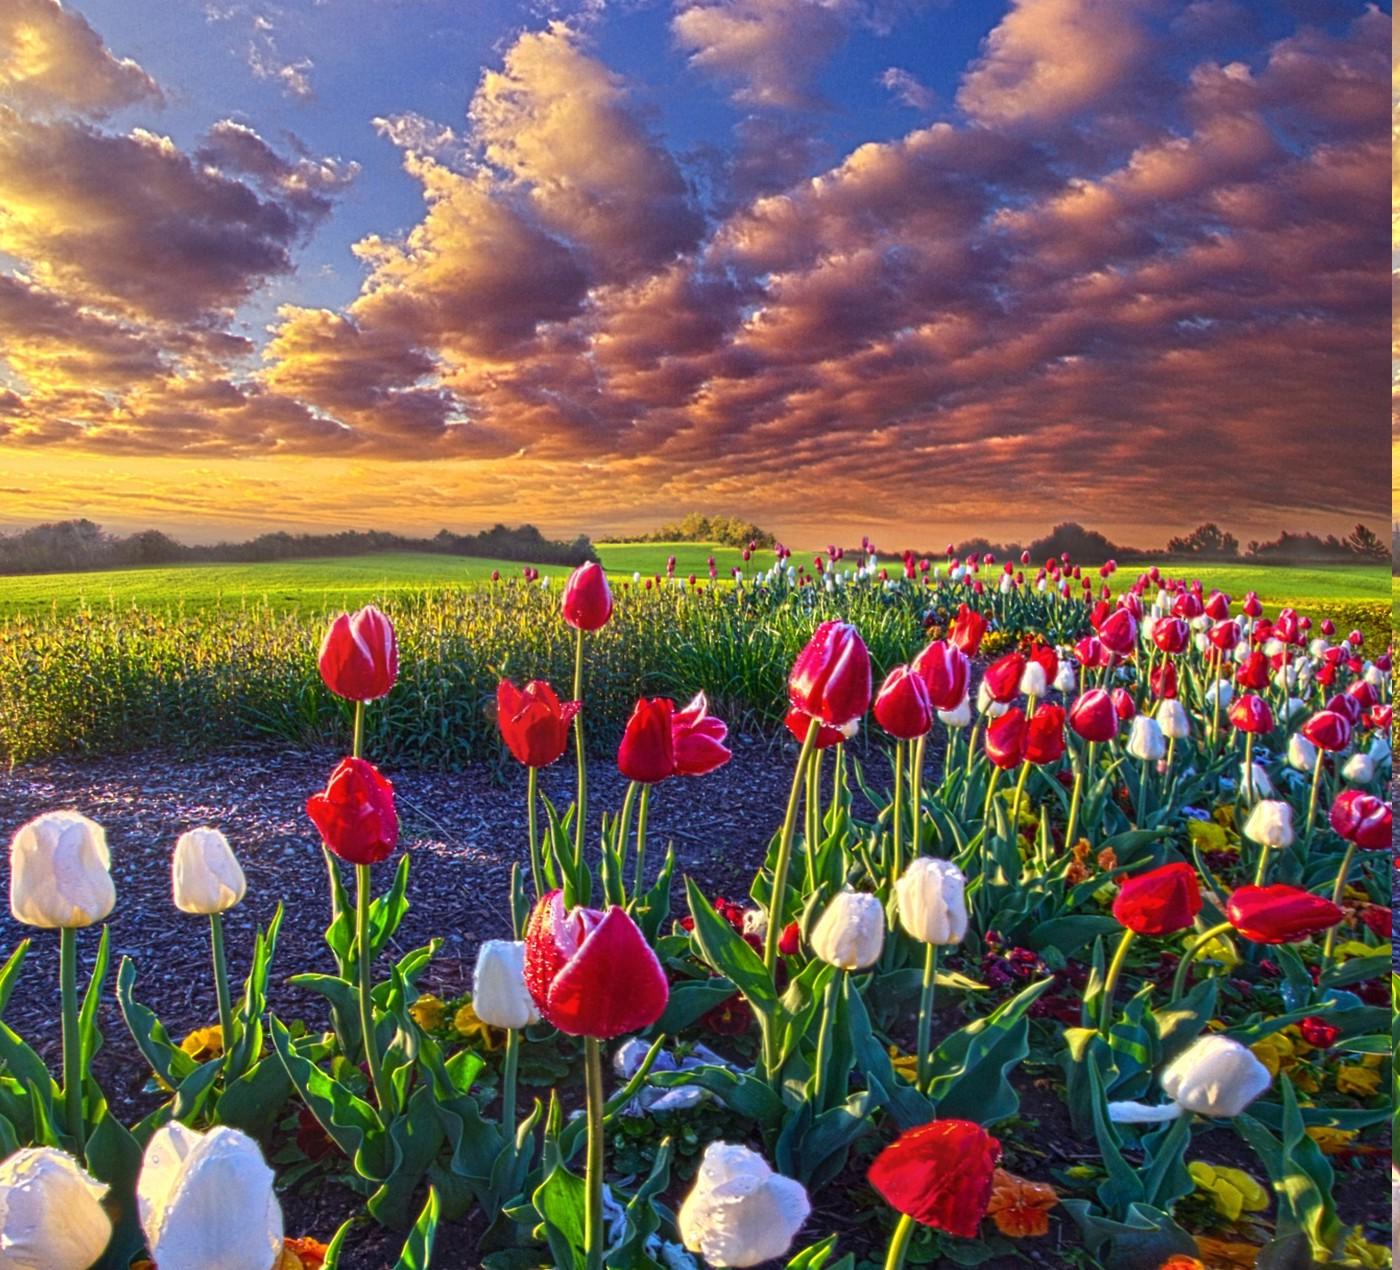 spring, Flowers, Tulips, Field, Sunrise, Grass, Clouds, Nature